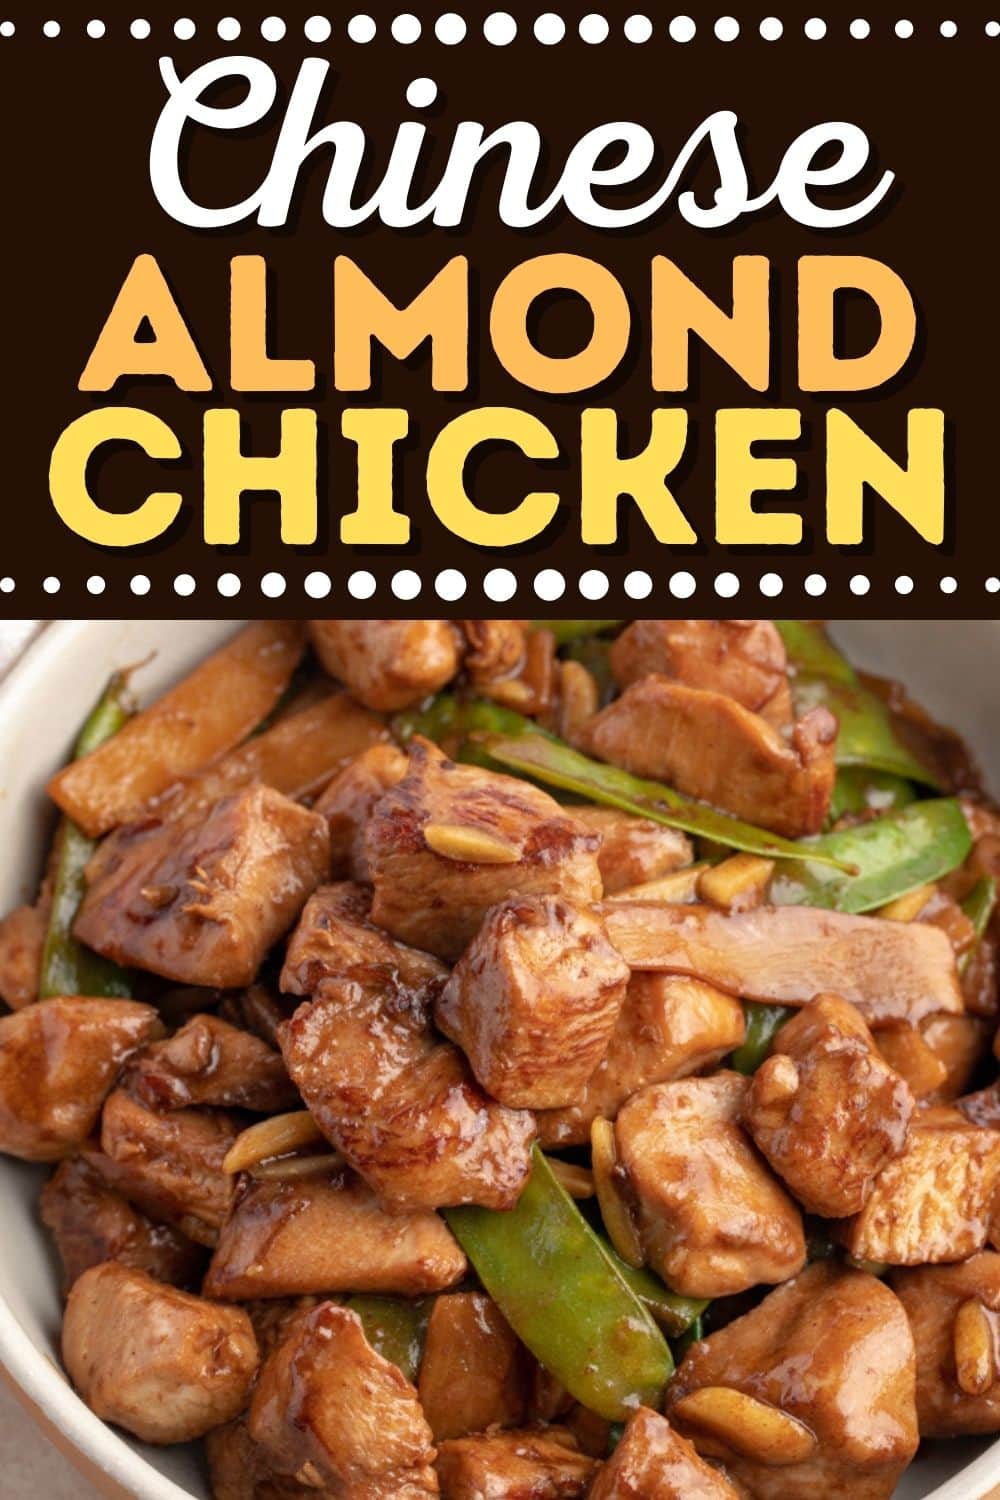 Easy Chinese Almond Chicken Recipe - Insanely Good